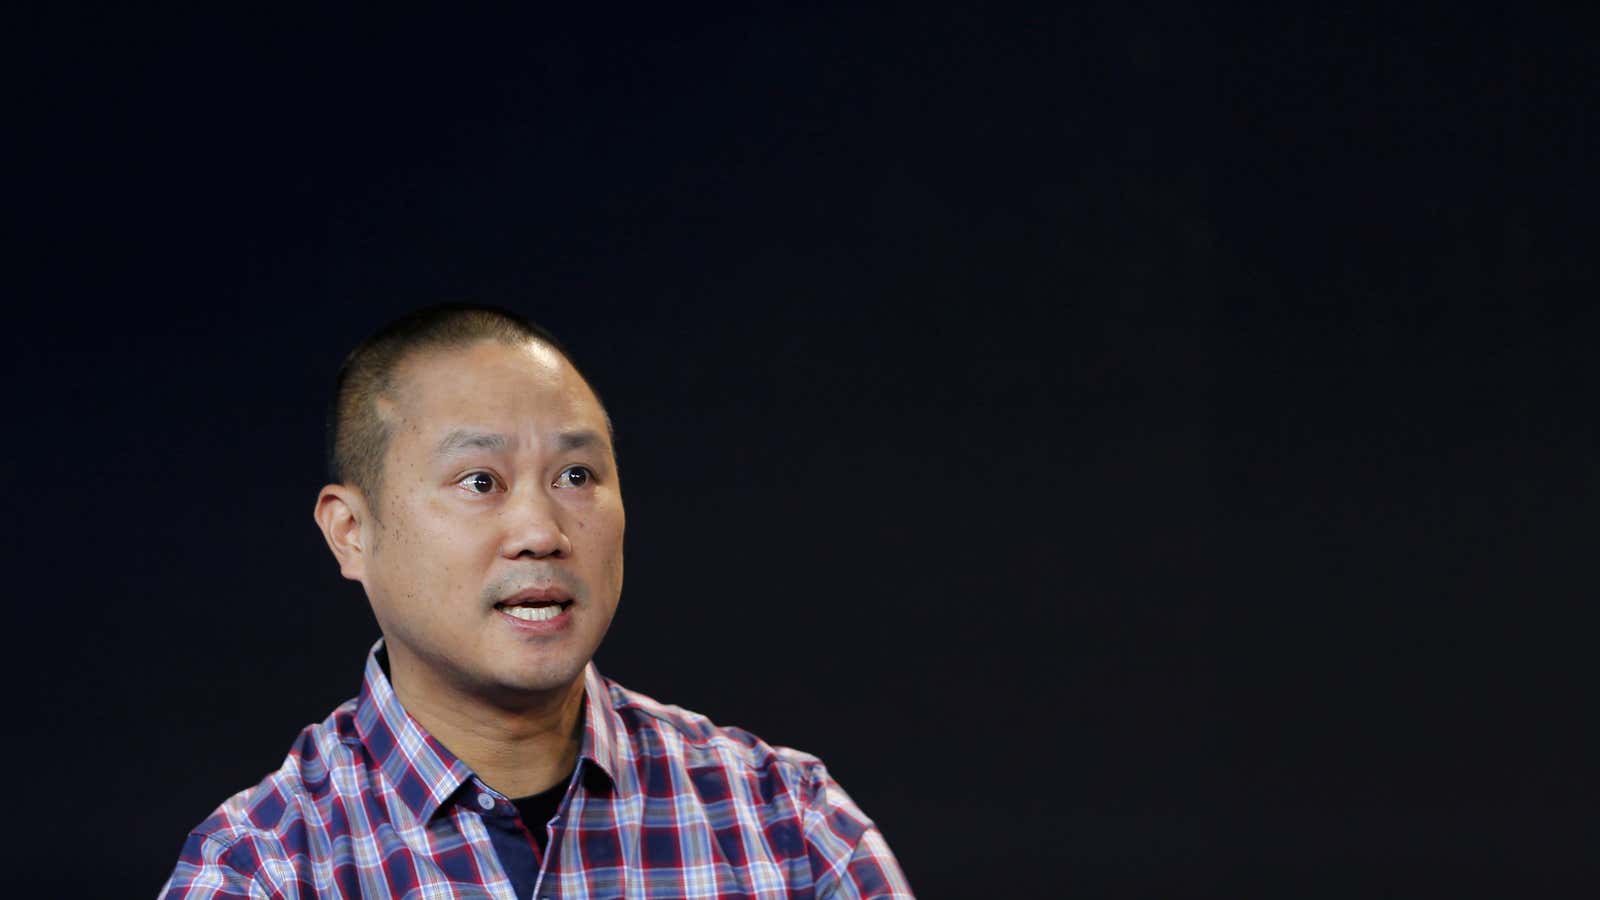 Tony Hsieh, CEO of Zappos, has been one of Holacracy’s biggest boosters.